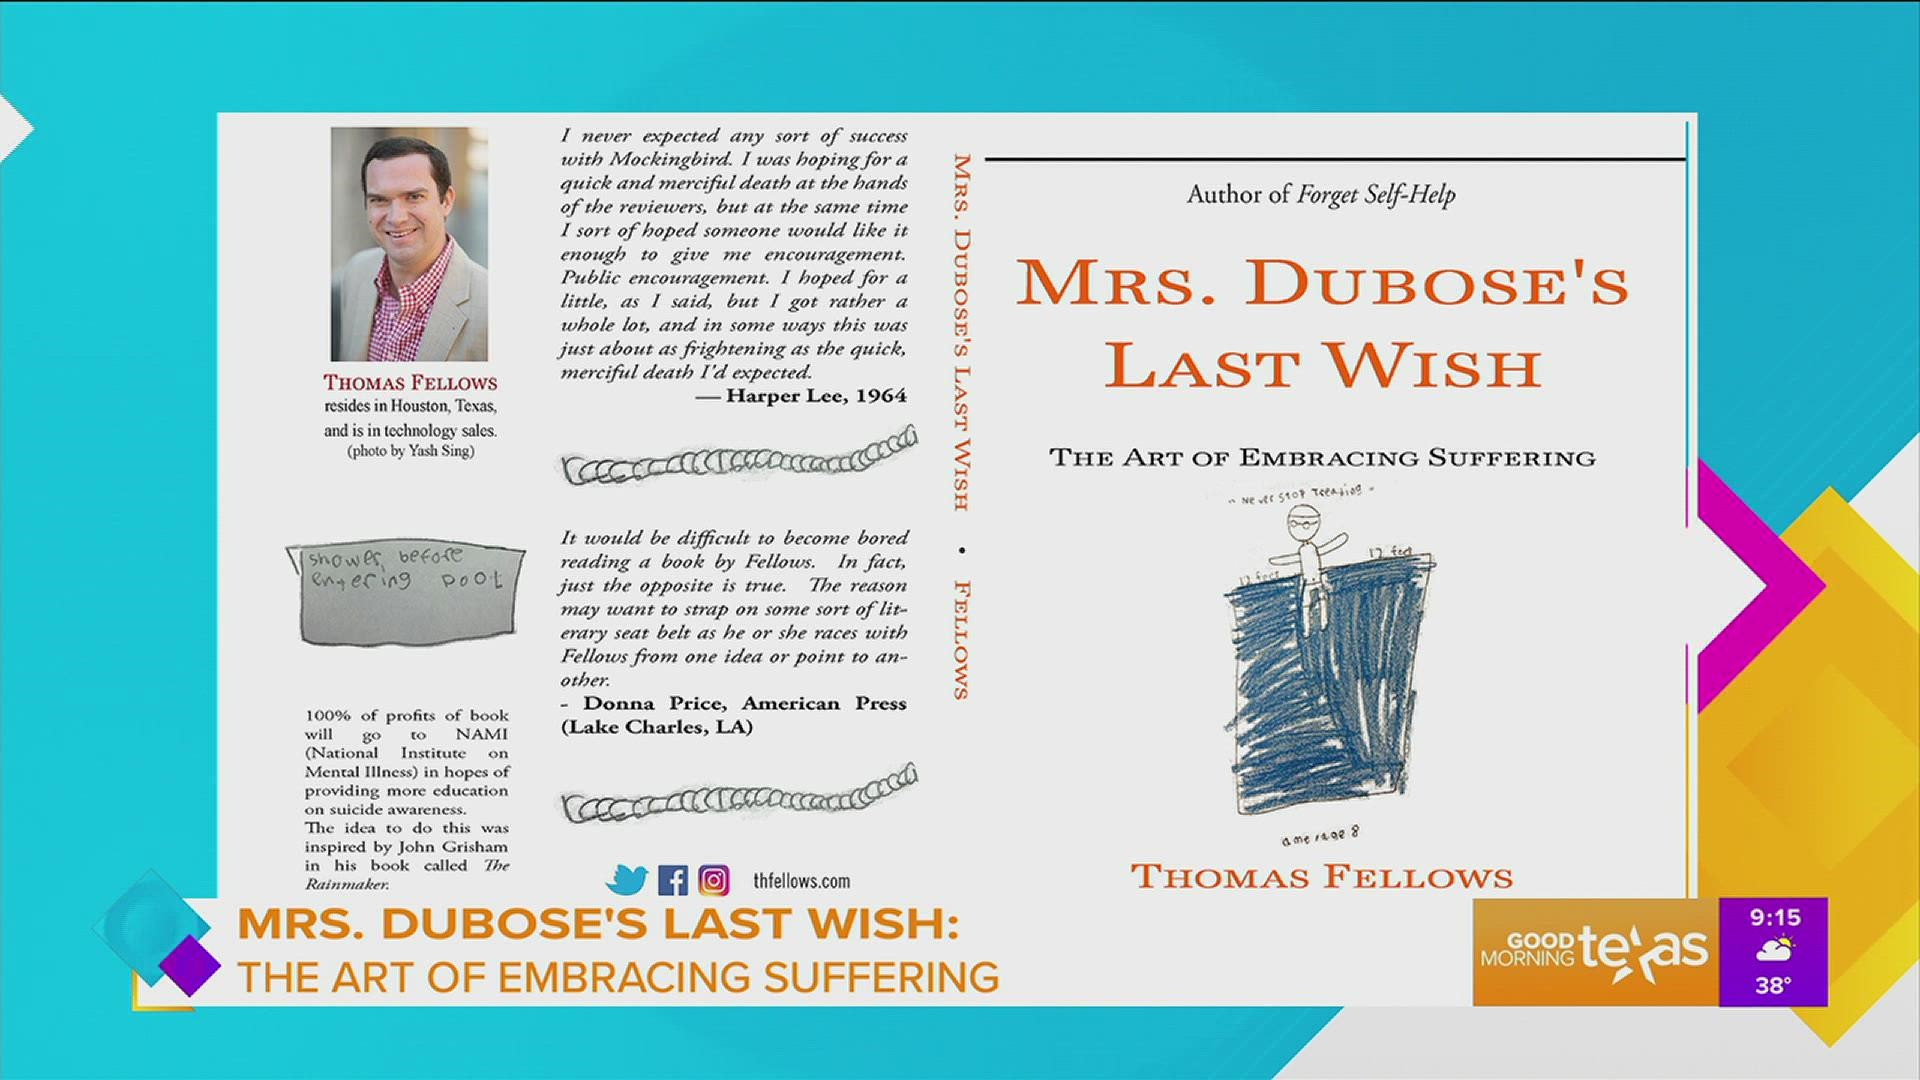 Houston author Thomas Fellows joins us to talk about his new book “Mrs. Dubose’s Last Wish: The Art of Embracing Suffering.”